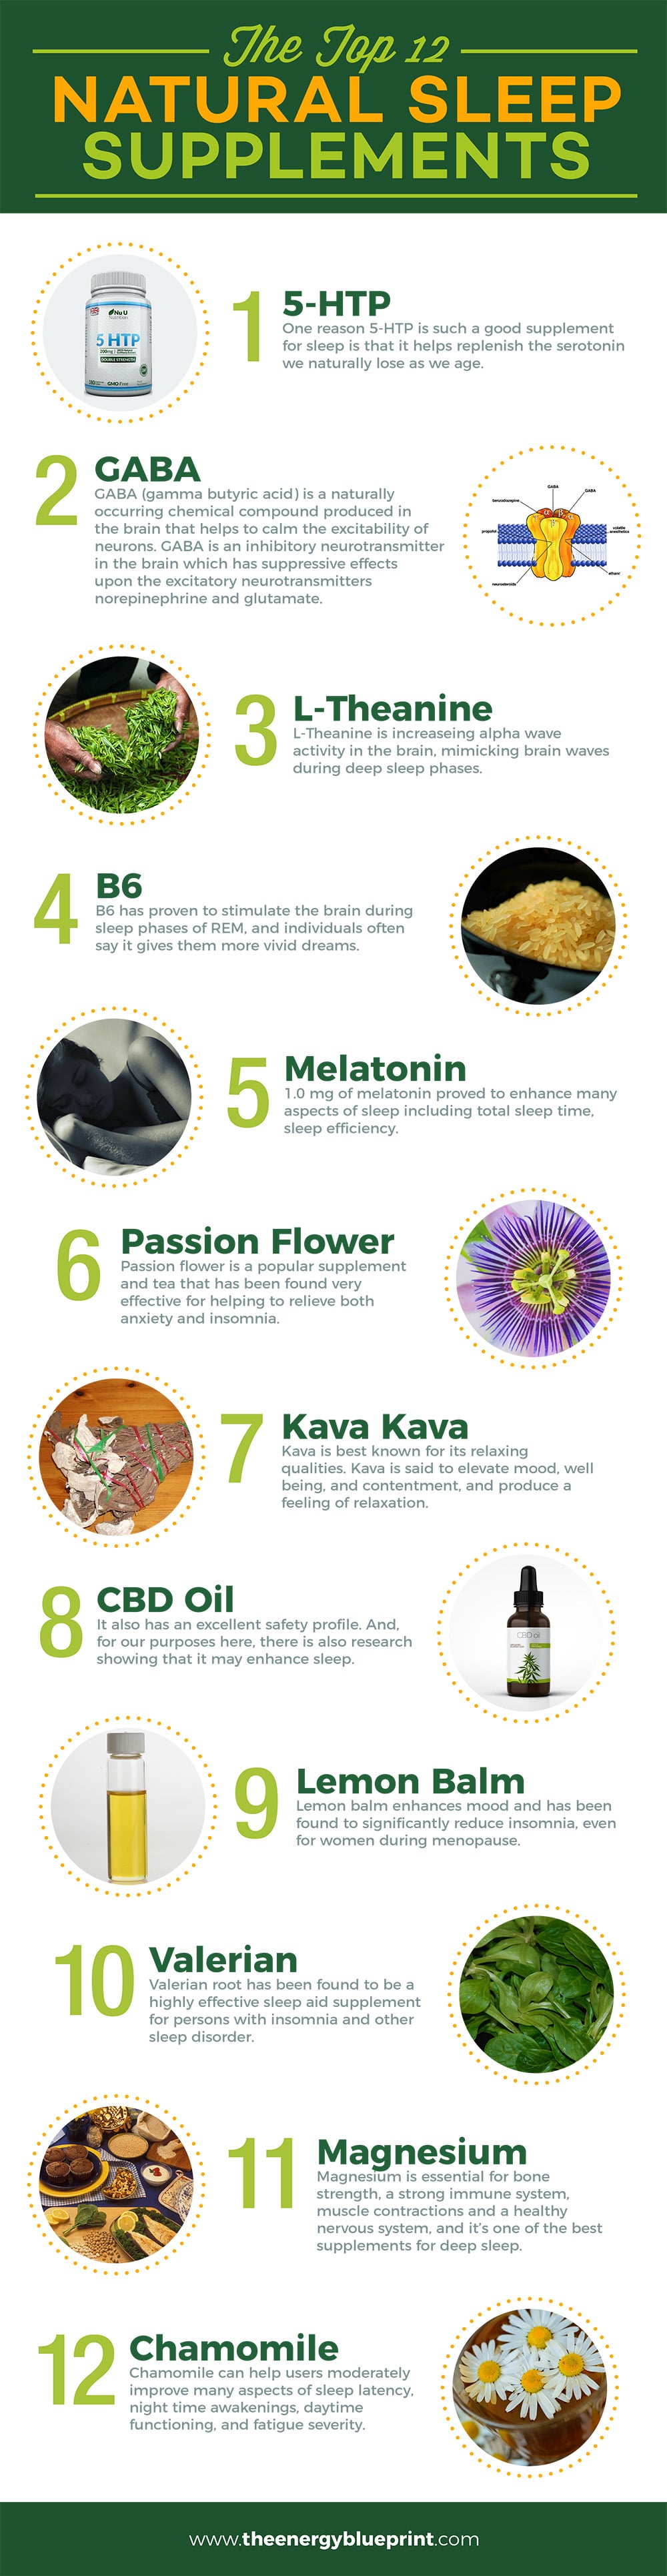 The Top 12 Natural Sleep Supplements - The Energy Blueprint